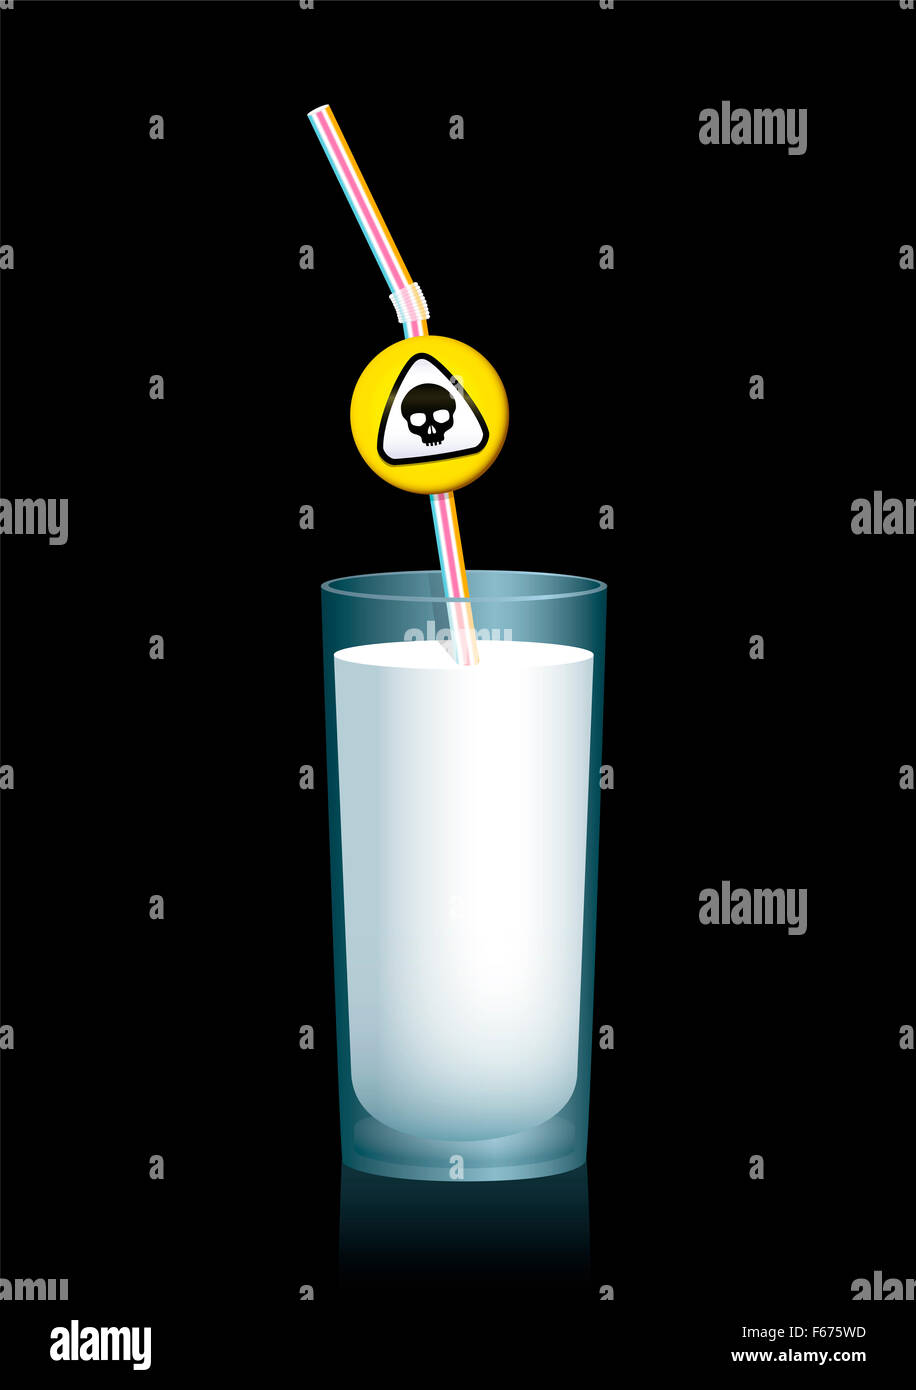 Unhealthy milk - straw with hazard sign on it, as a warning doubtful dairy products. Illustration on black background. Stock Photo